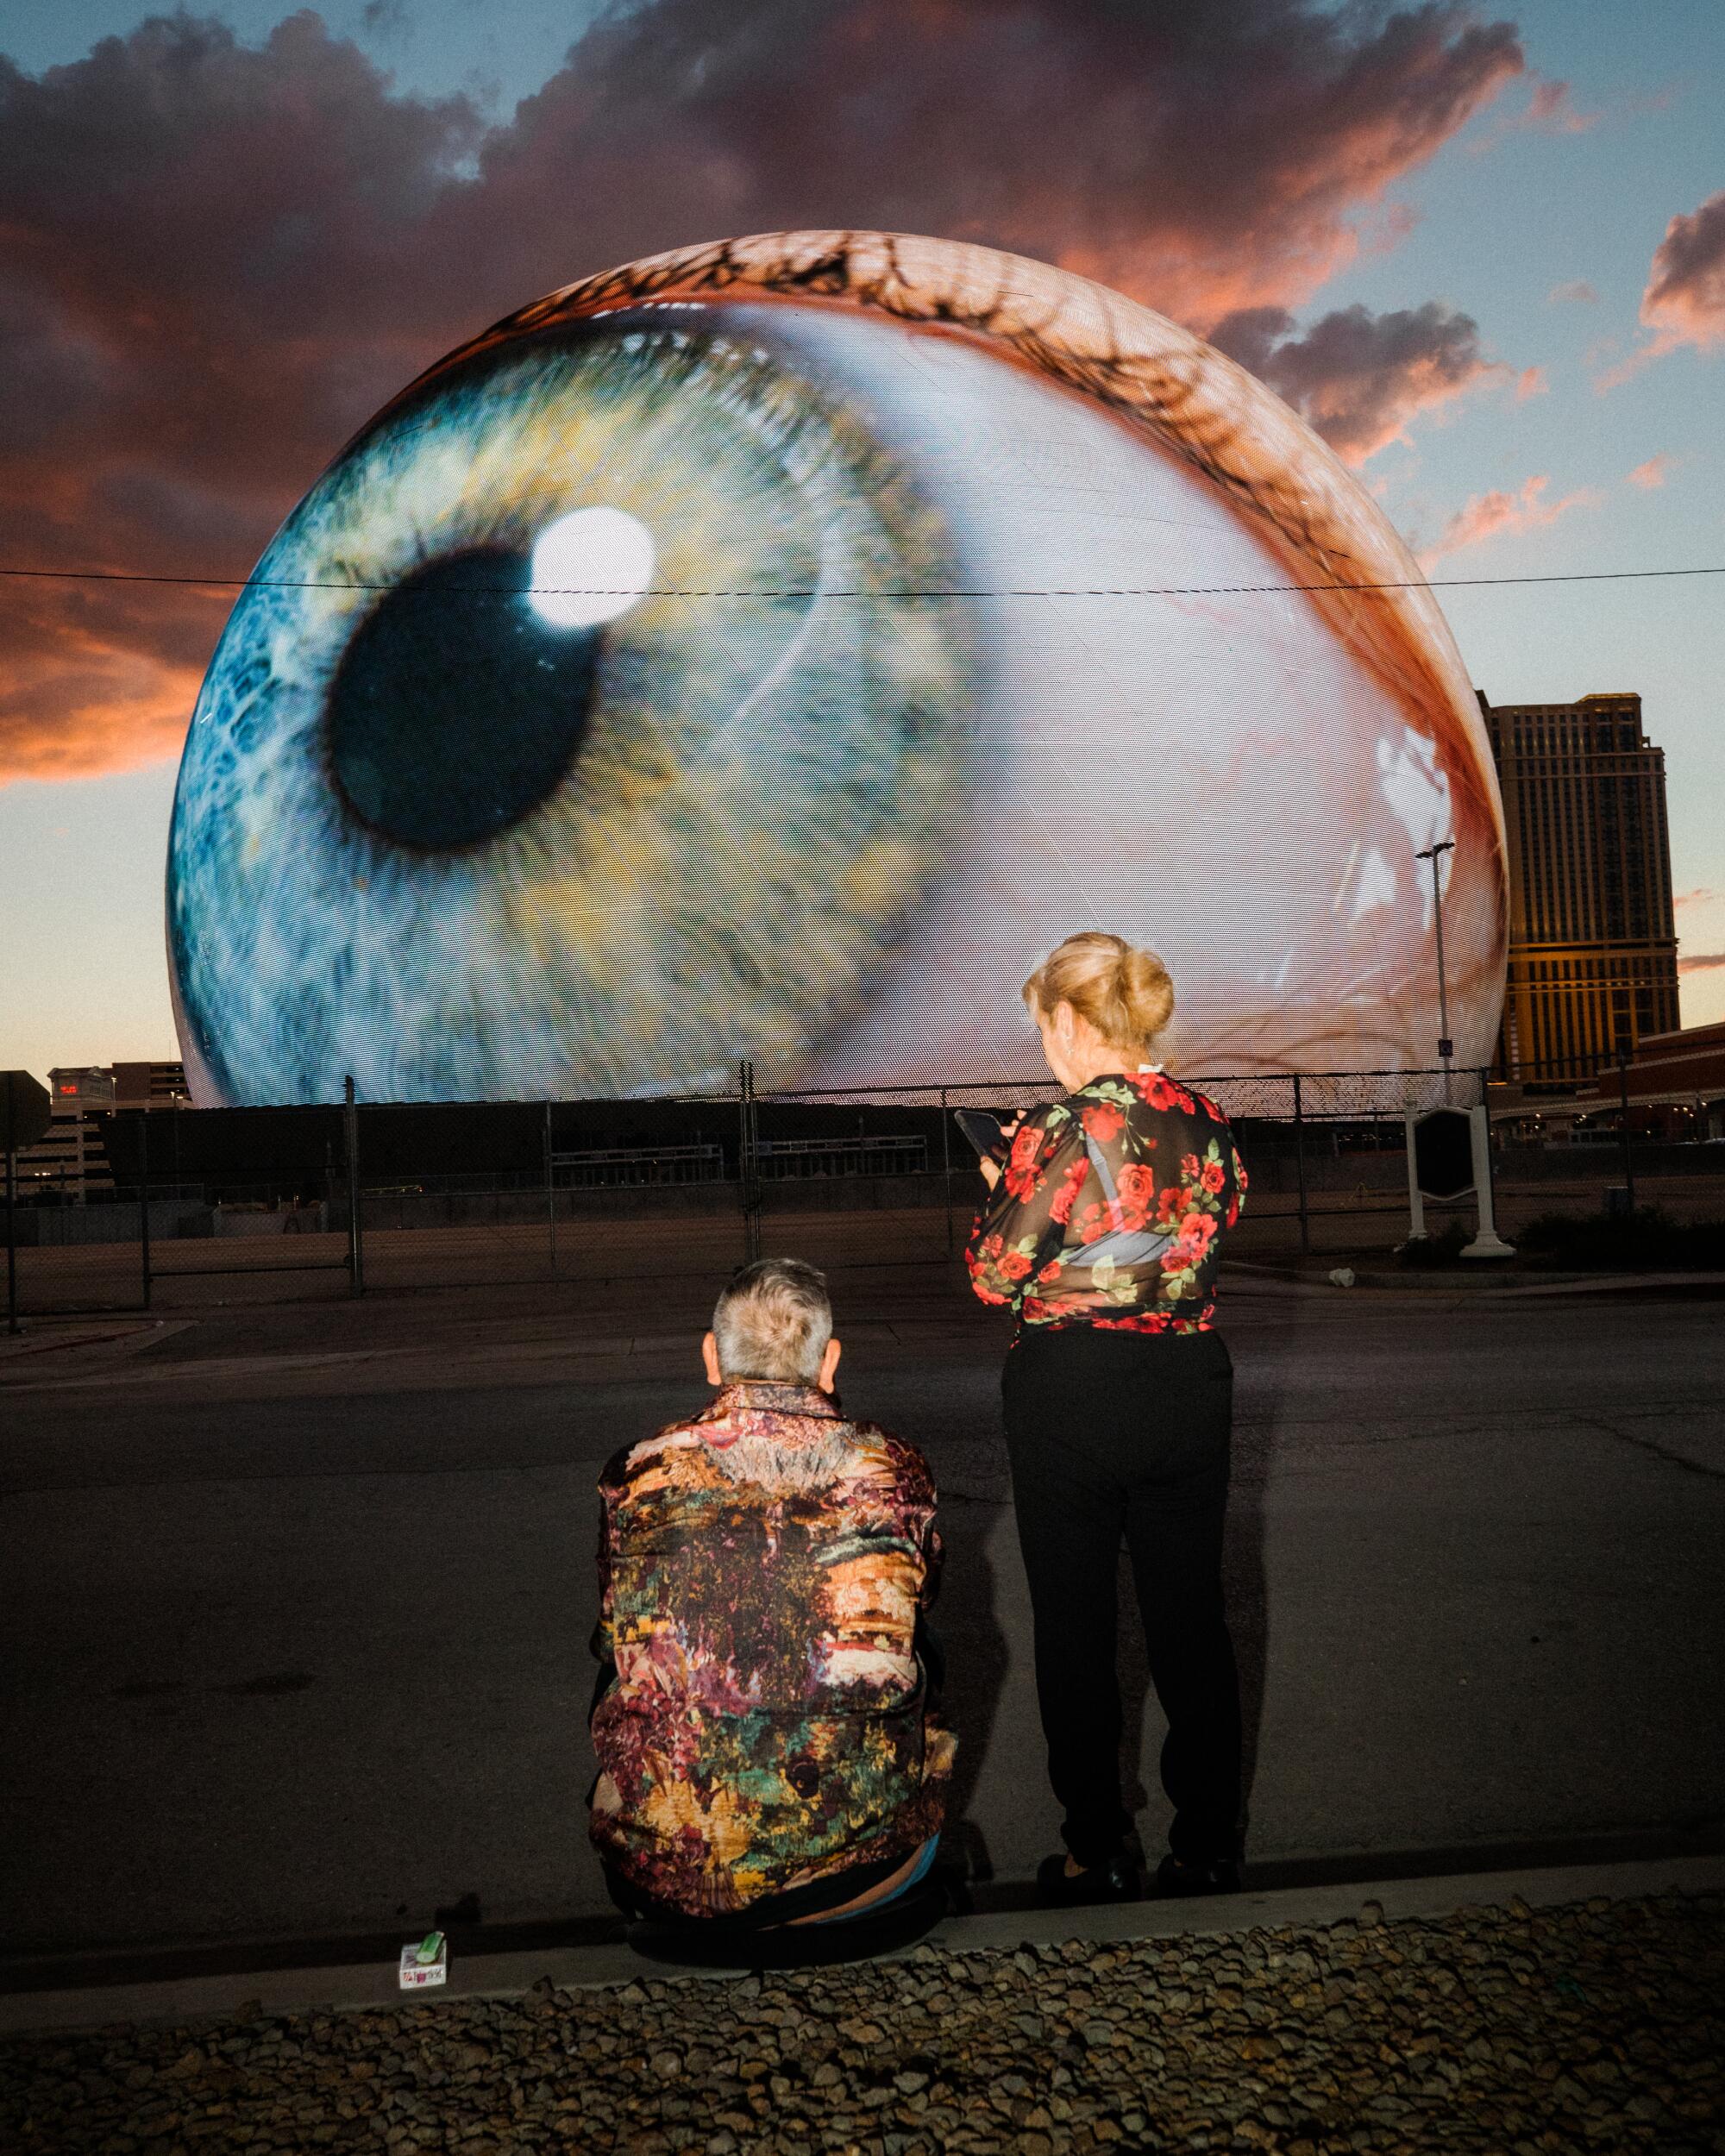 Two people wearing bright, shiny shirts stand observing a spherical building broadcasting an eyeball.